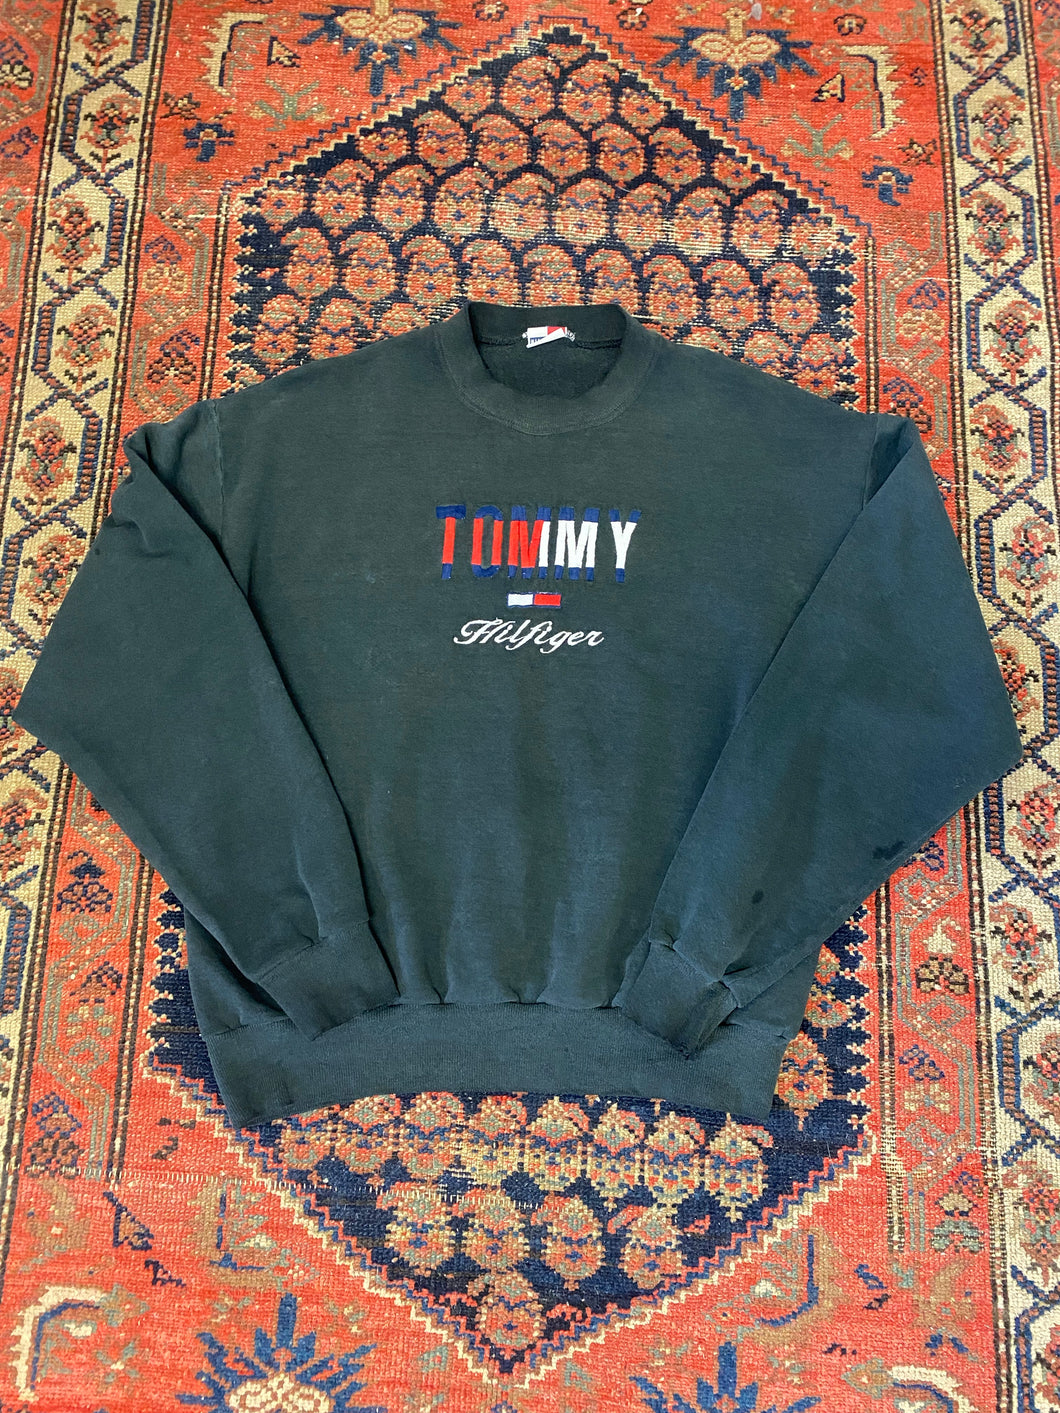 90s Bootleg Embroidered Tommy Hilfiger Crewneck - S